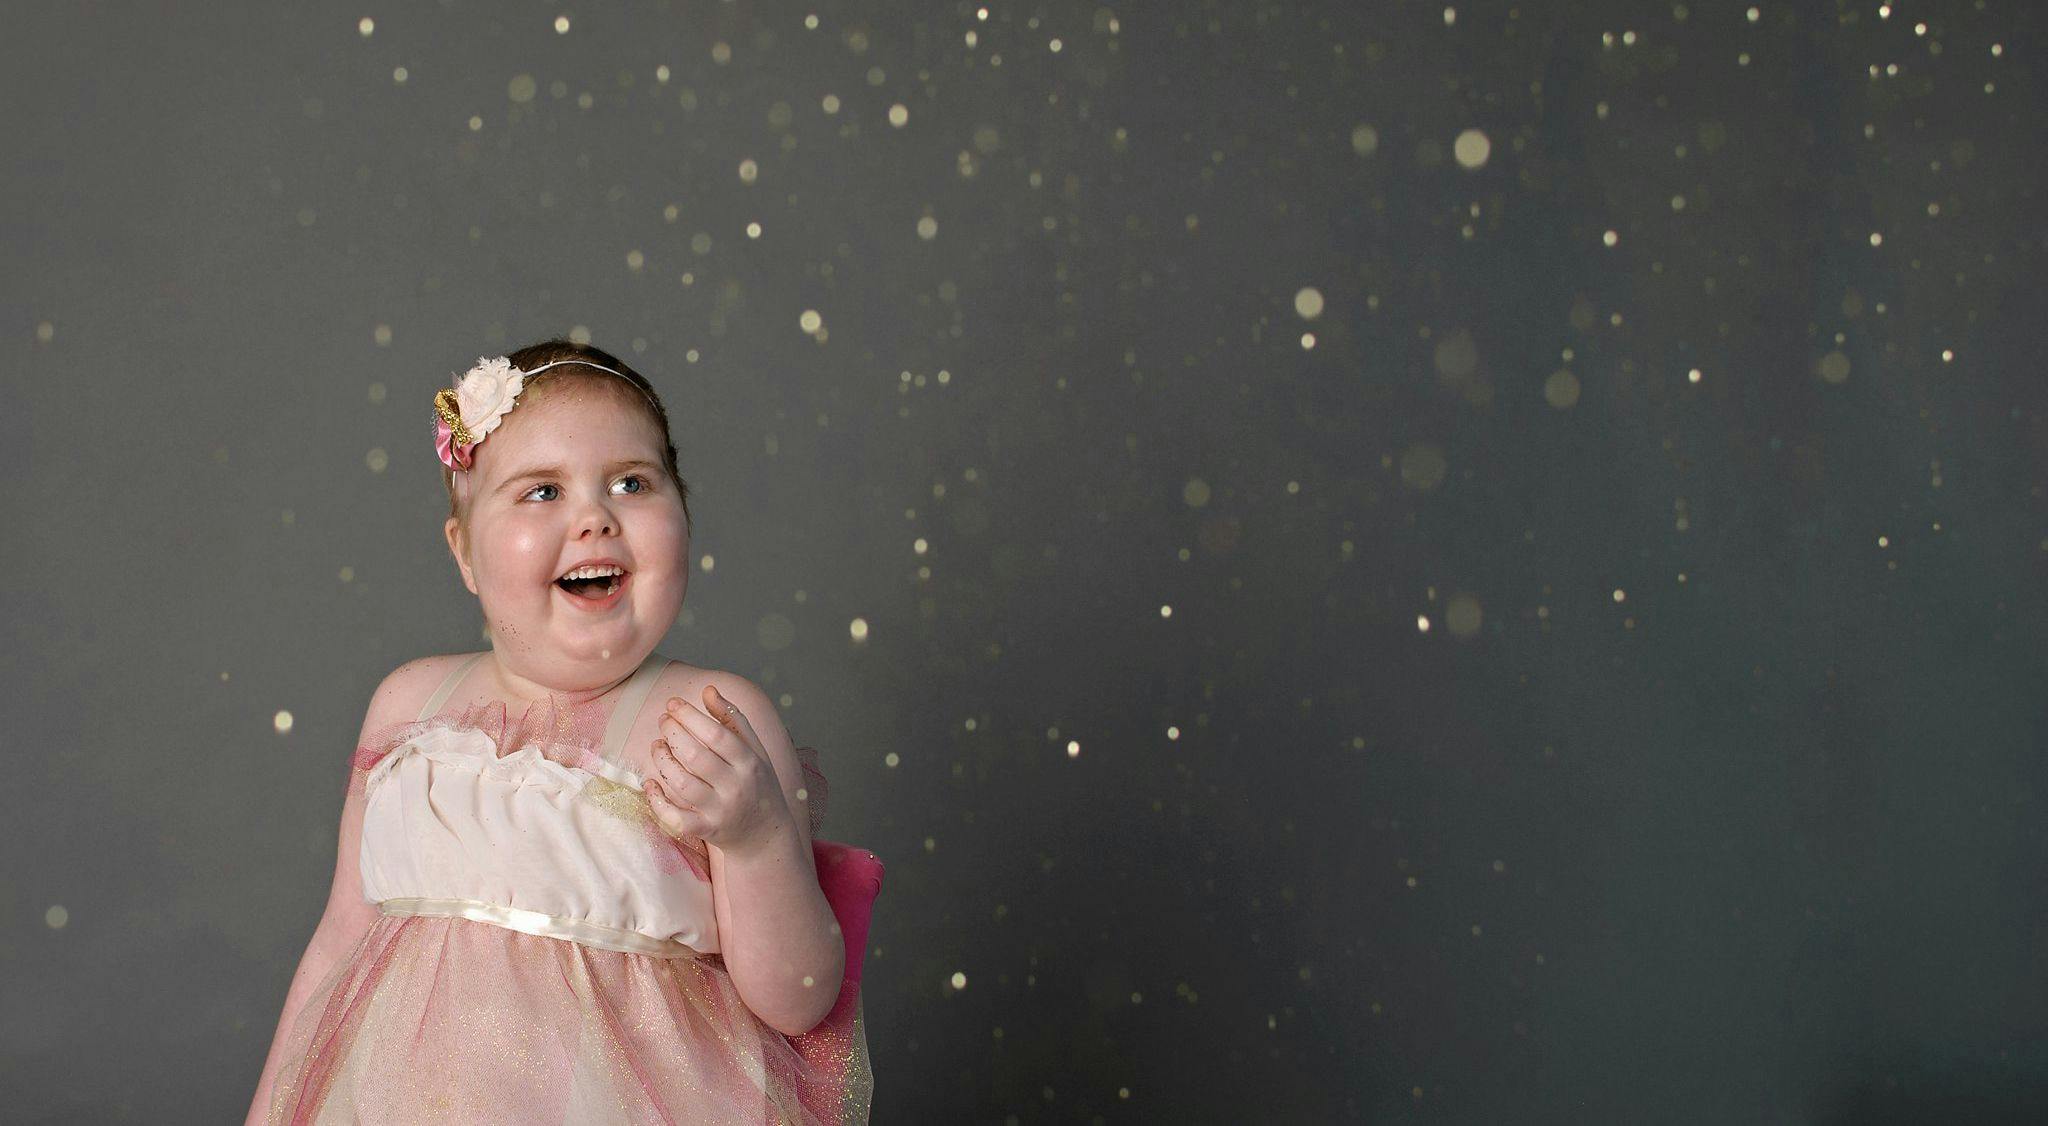 With Ava's photo session, the seed of the Gold Hope Project was planted. - PHOTO COURTESY OF THE GOLD HOPE PROJECT